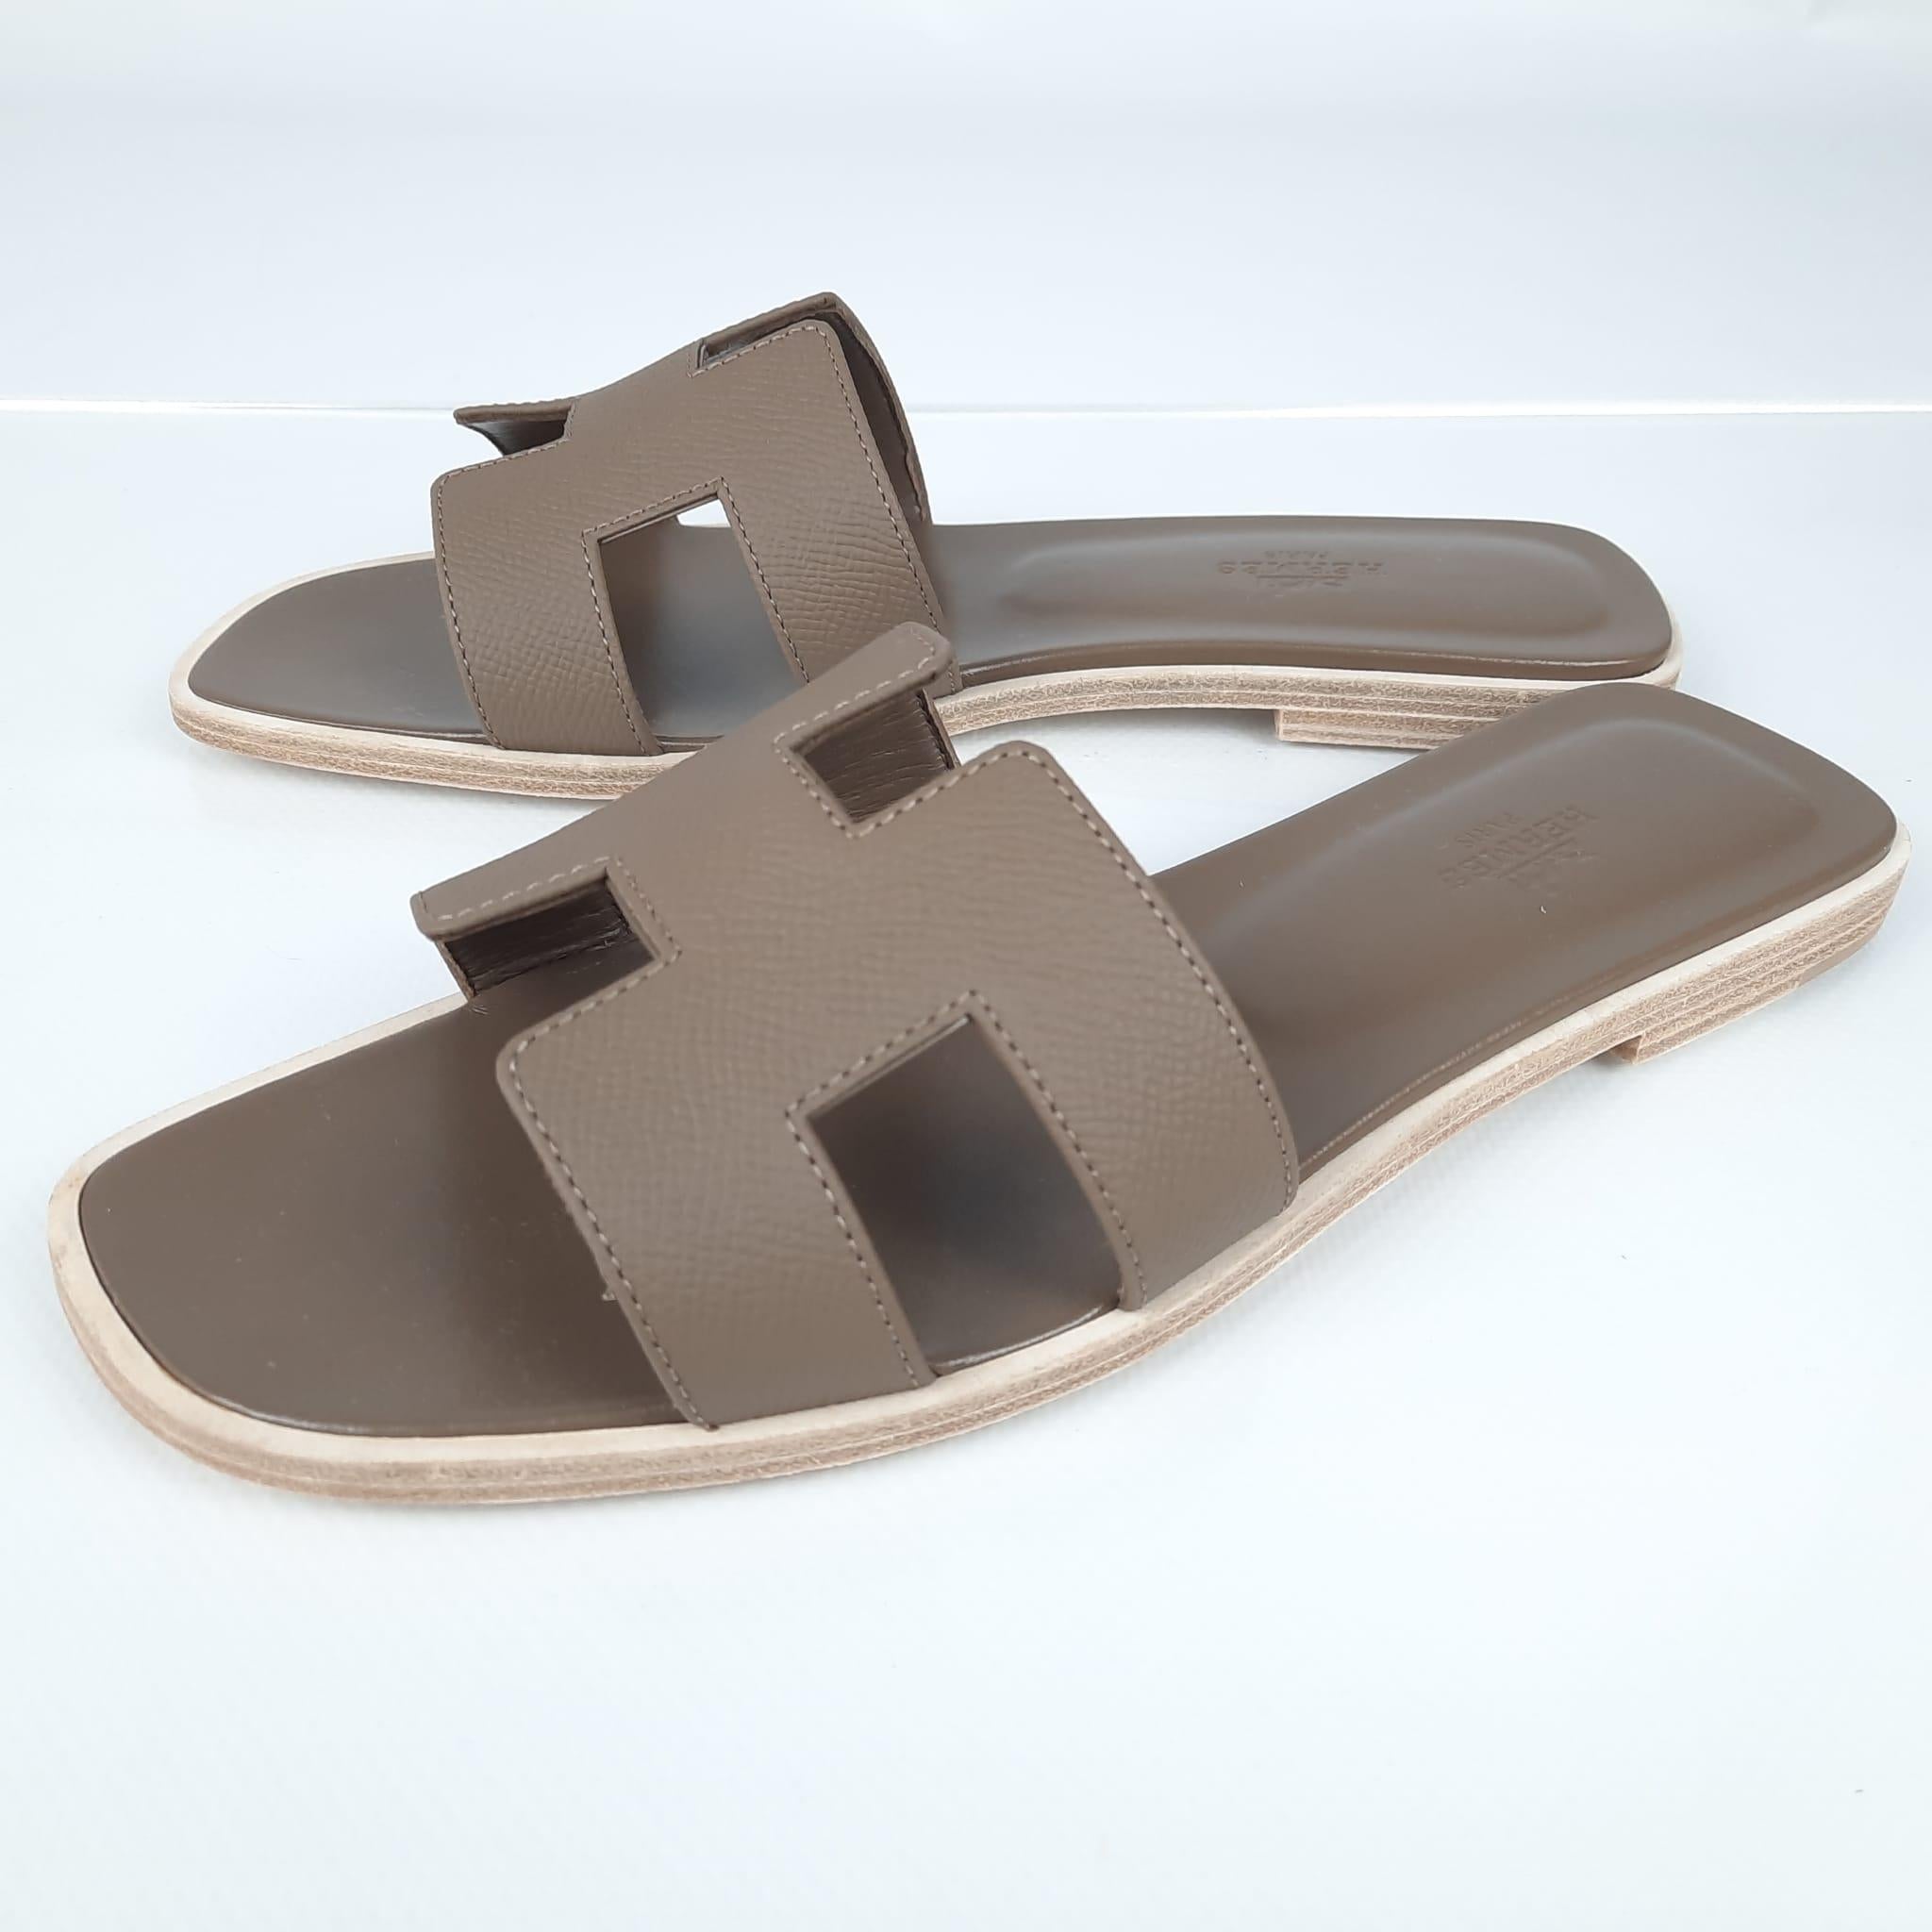 Size 37
Sandal in Epsom calfskin with iconic 